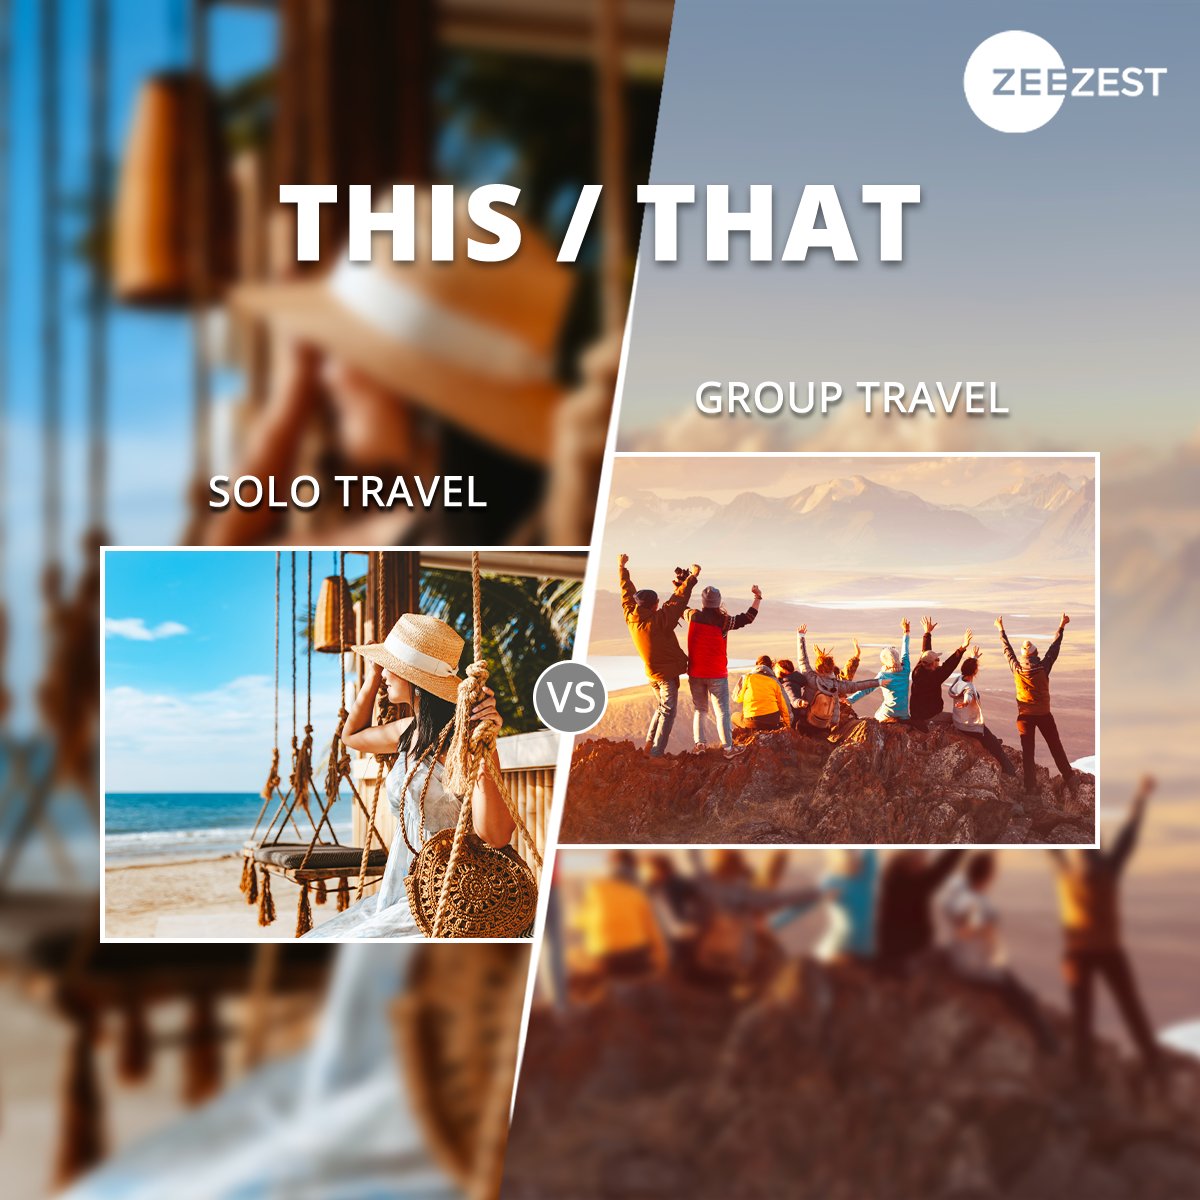 What's your travel personality? Tell us in the comments below!

#ThisOrThat #SoloTravel #GroupTravel #TravelIdeas #ZestAprilAdventure #ZeeZest